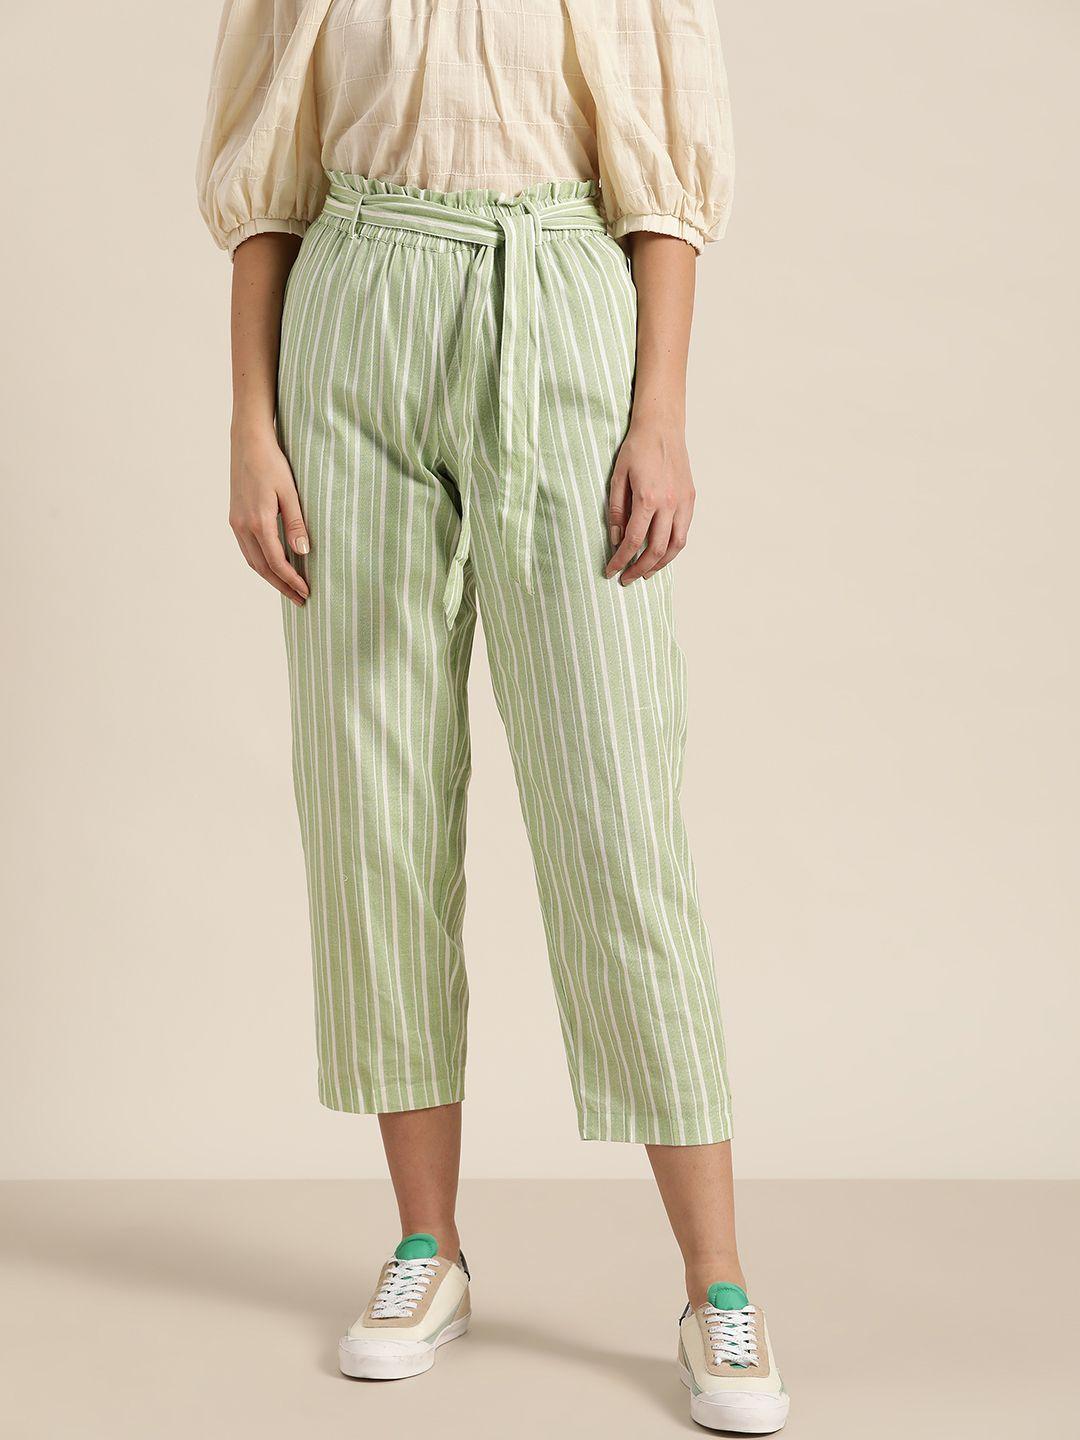 shae-by-sassafras-women-green-&-white-striped-paper-bag-waist-cropped-trousers